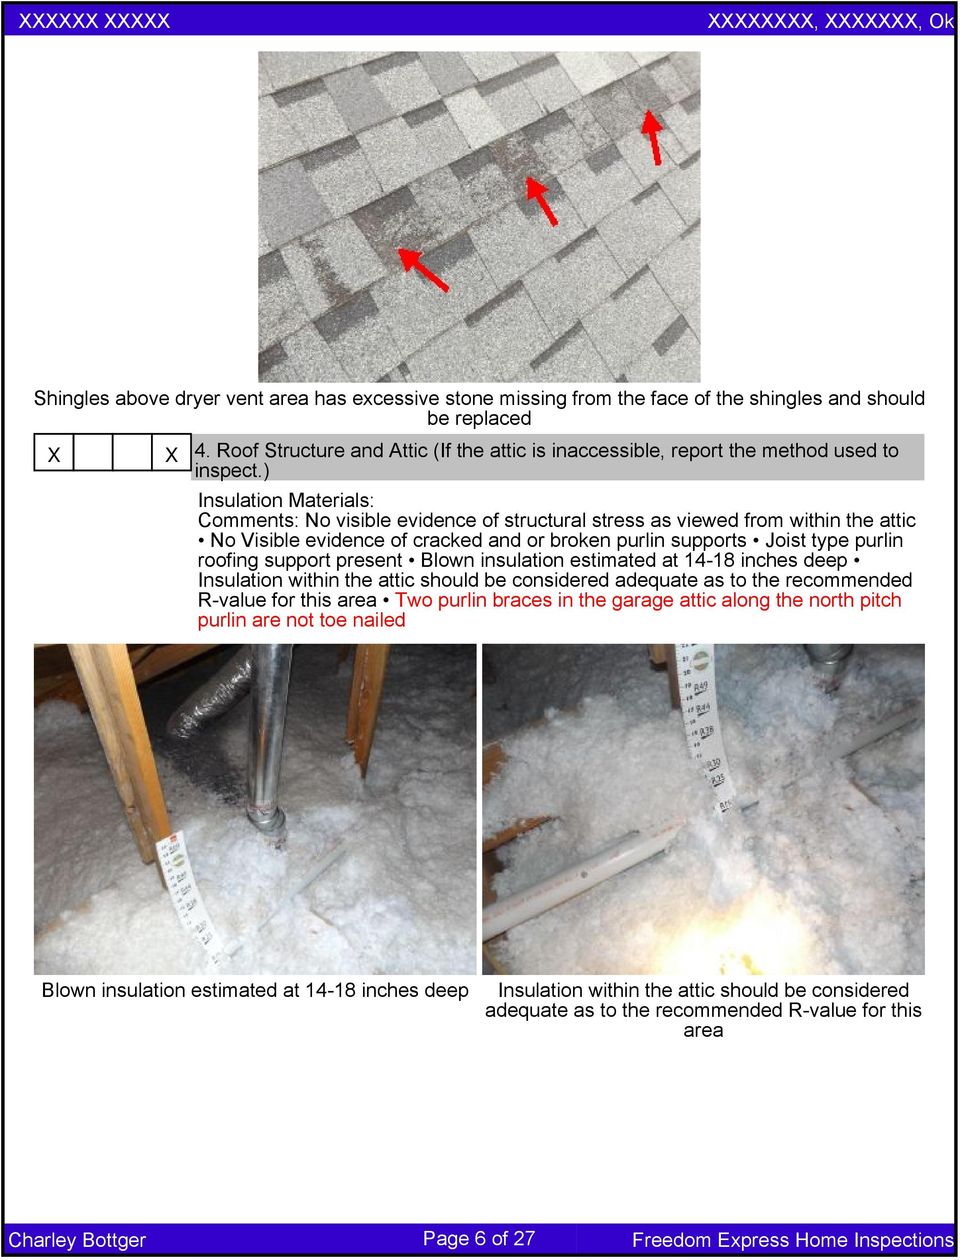 ) Insulation Materials: Comments: No visible evidence of structural stress as viewed from within the attic No Visible evidence of cracked and or broken purlin supports Joist type purlin roofing